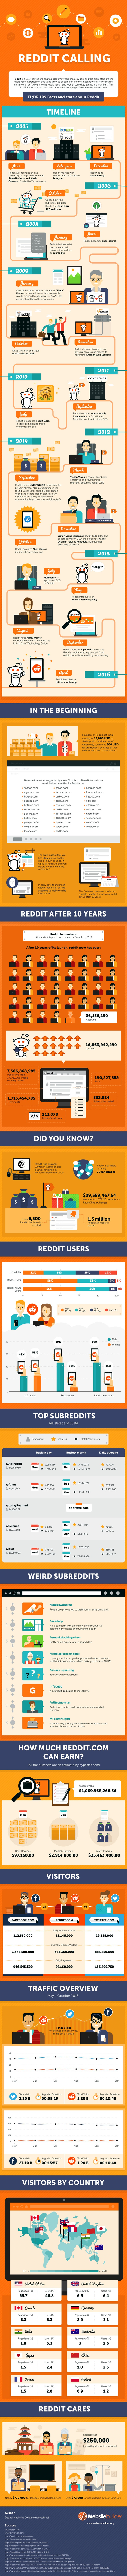 109 Facts and Stats About Reddit - #infographic